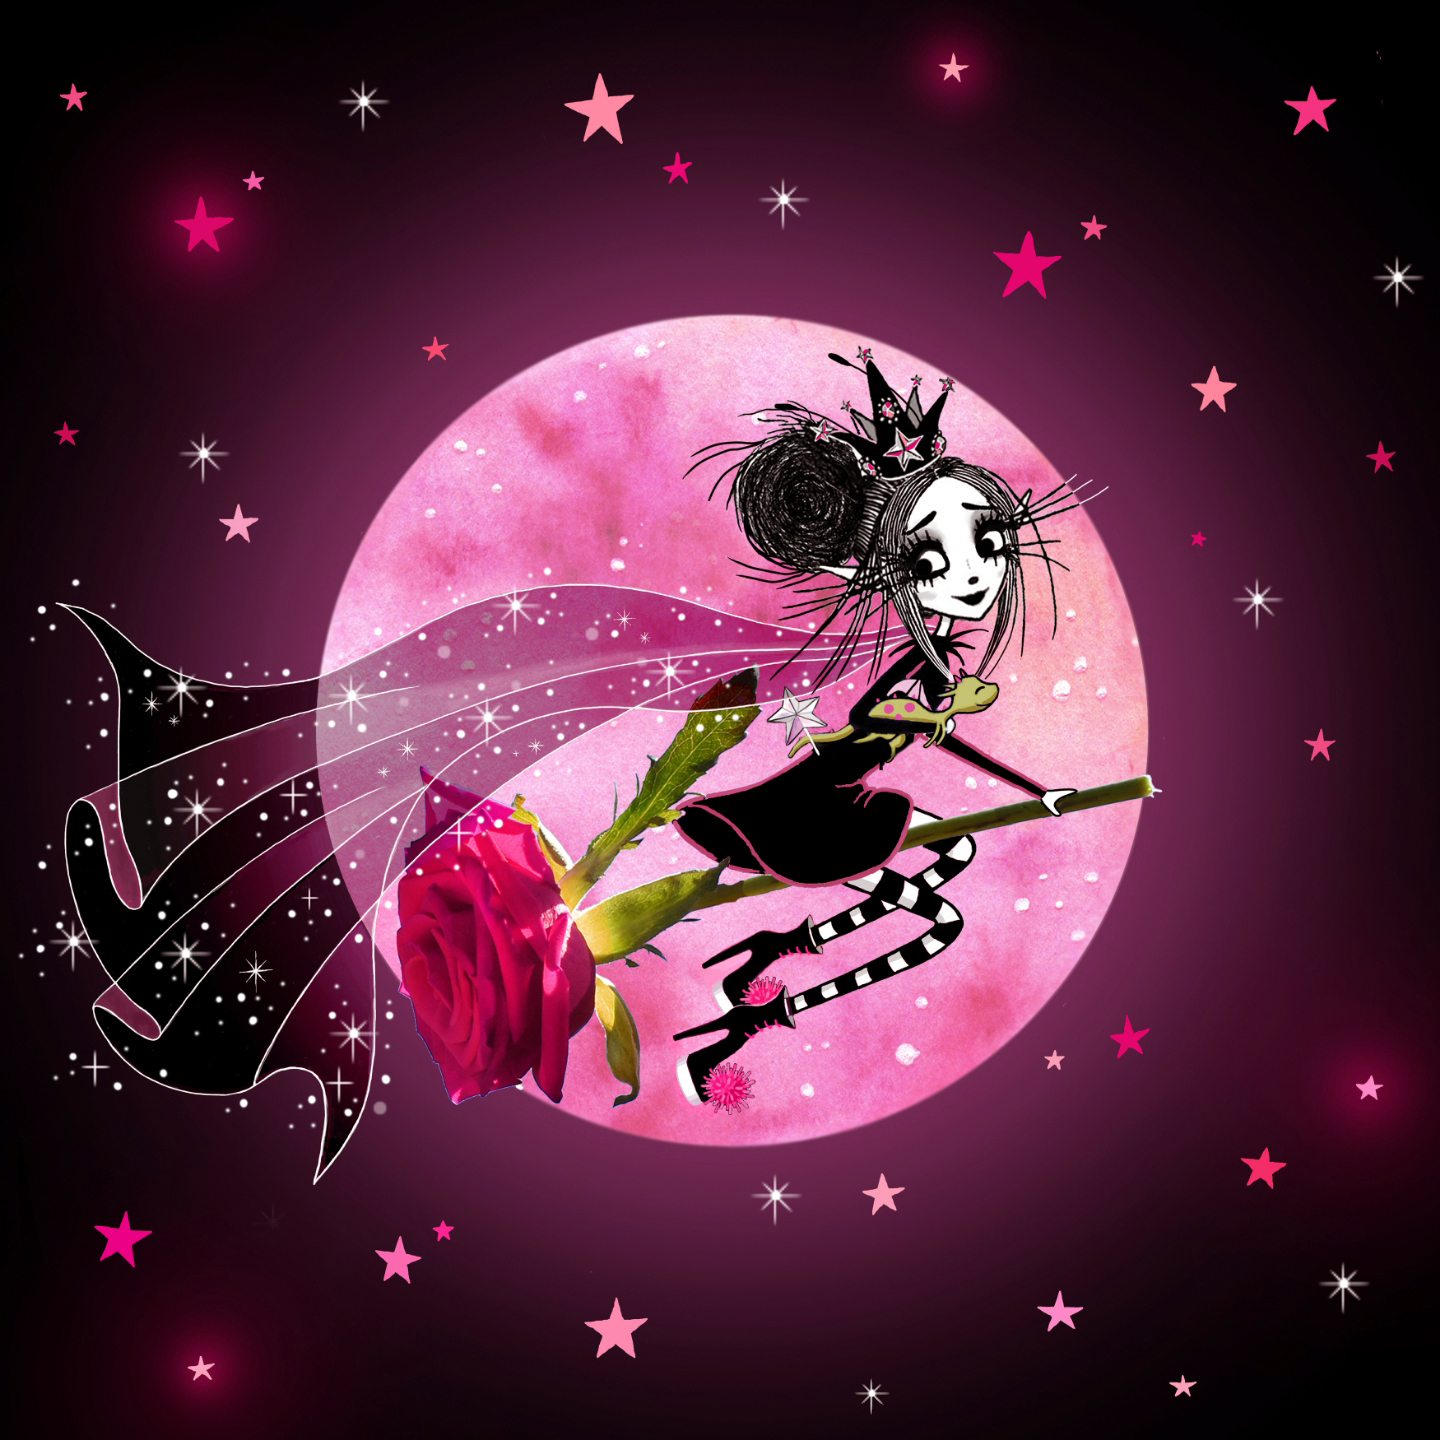 Victoria Stitch flying in front of a cherry pink moon